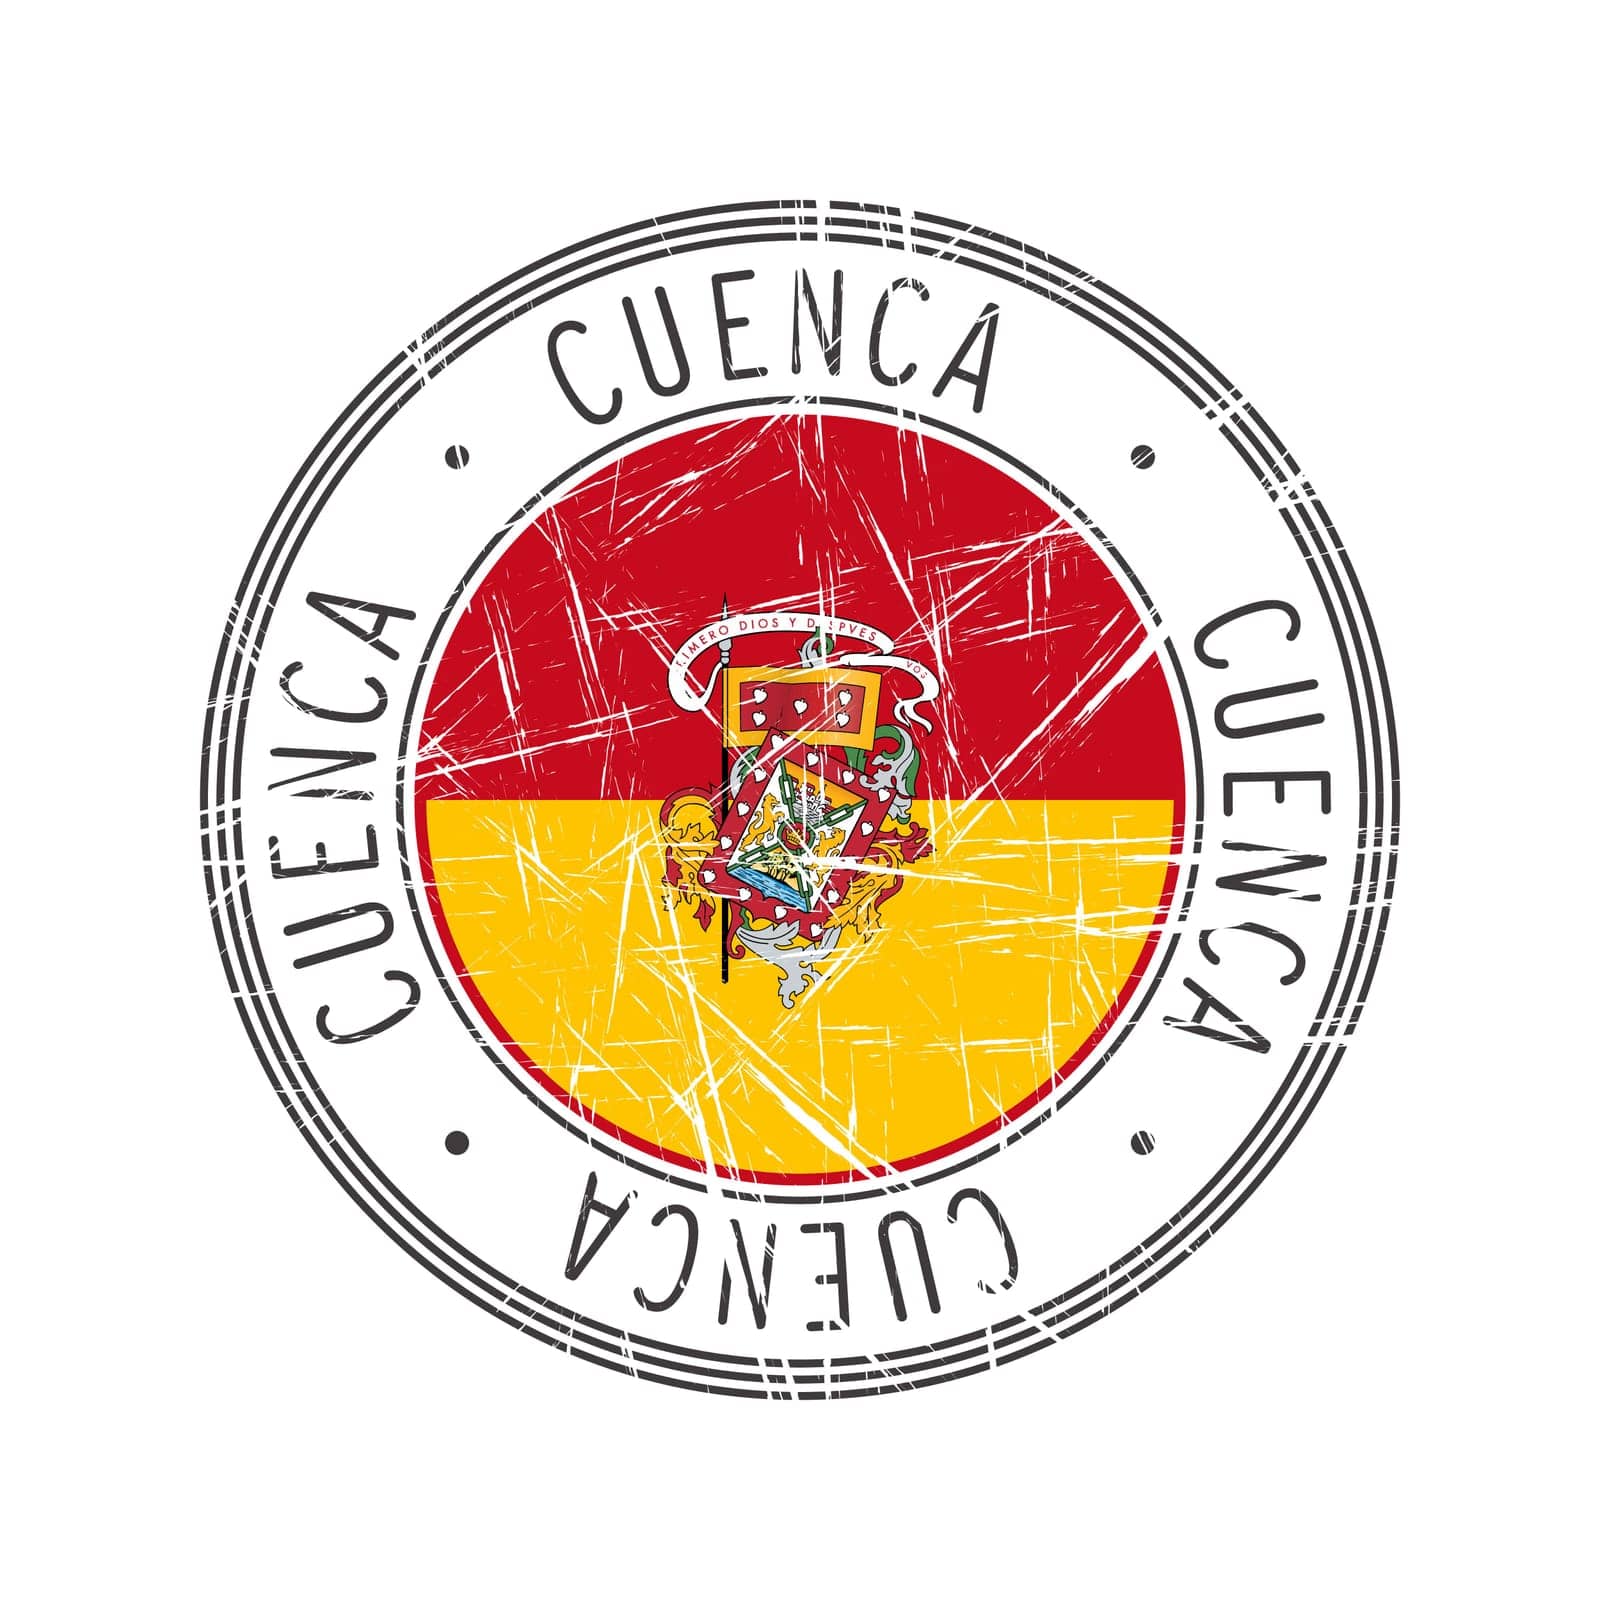 Cuenca city rubber stamp by Lirch